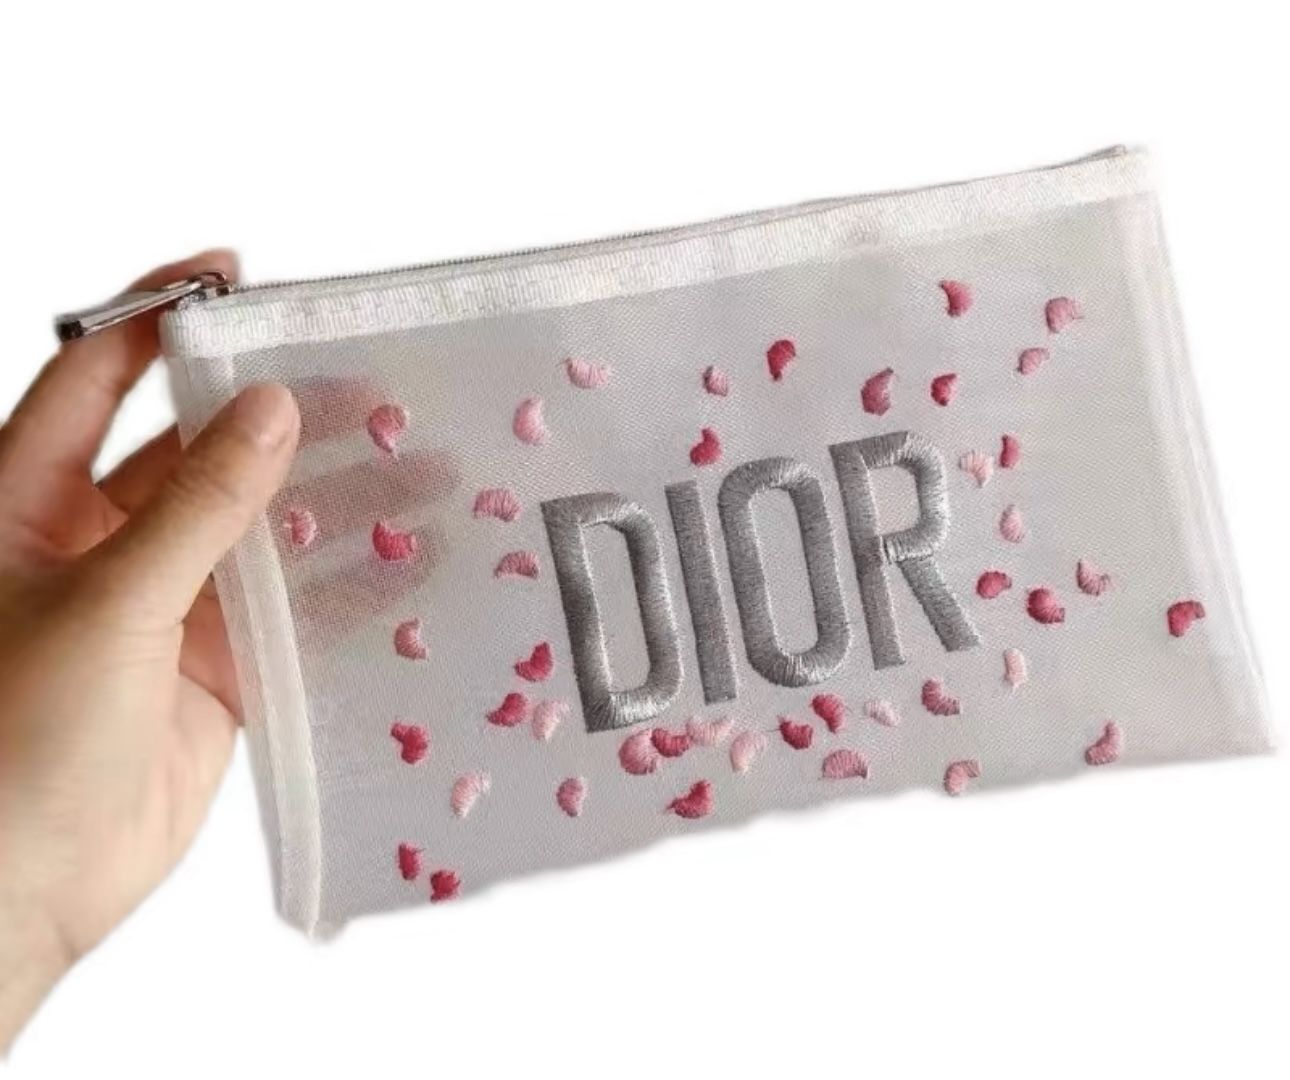 Christian Dior Pink Floral Cosmetic Bag Pouche Makeup Case